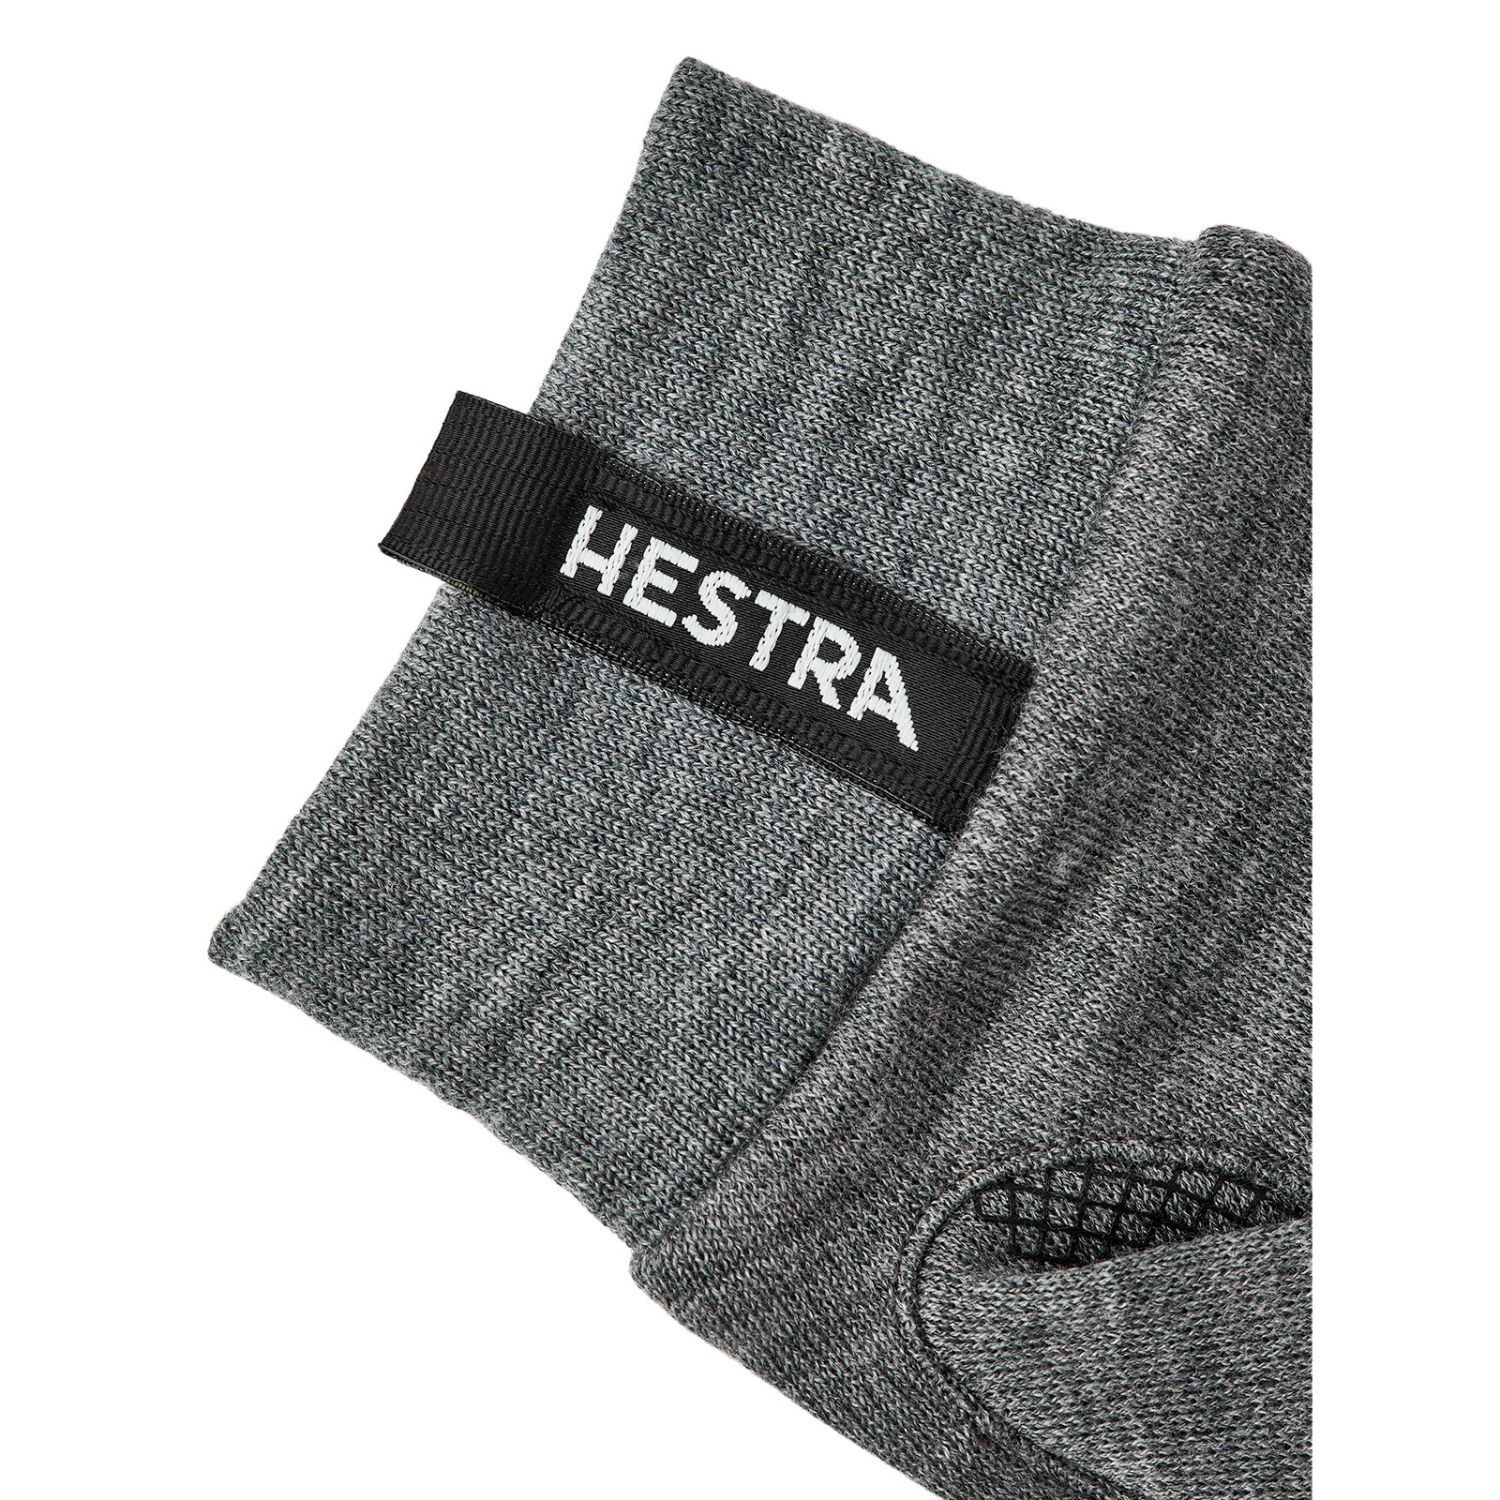 Hestra Merino Touch Point liner, grey